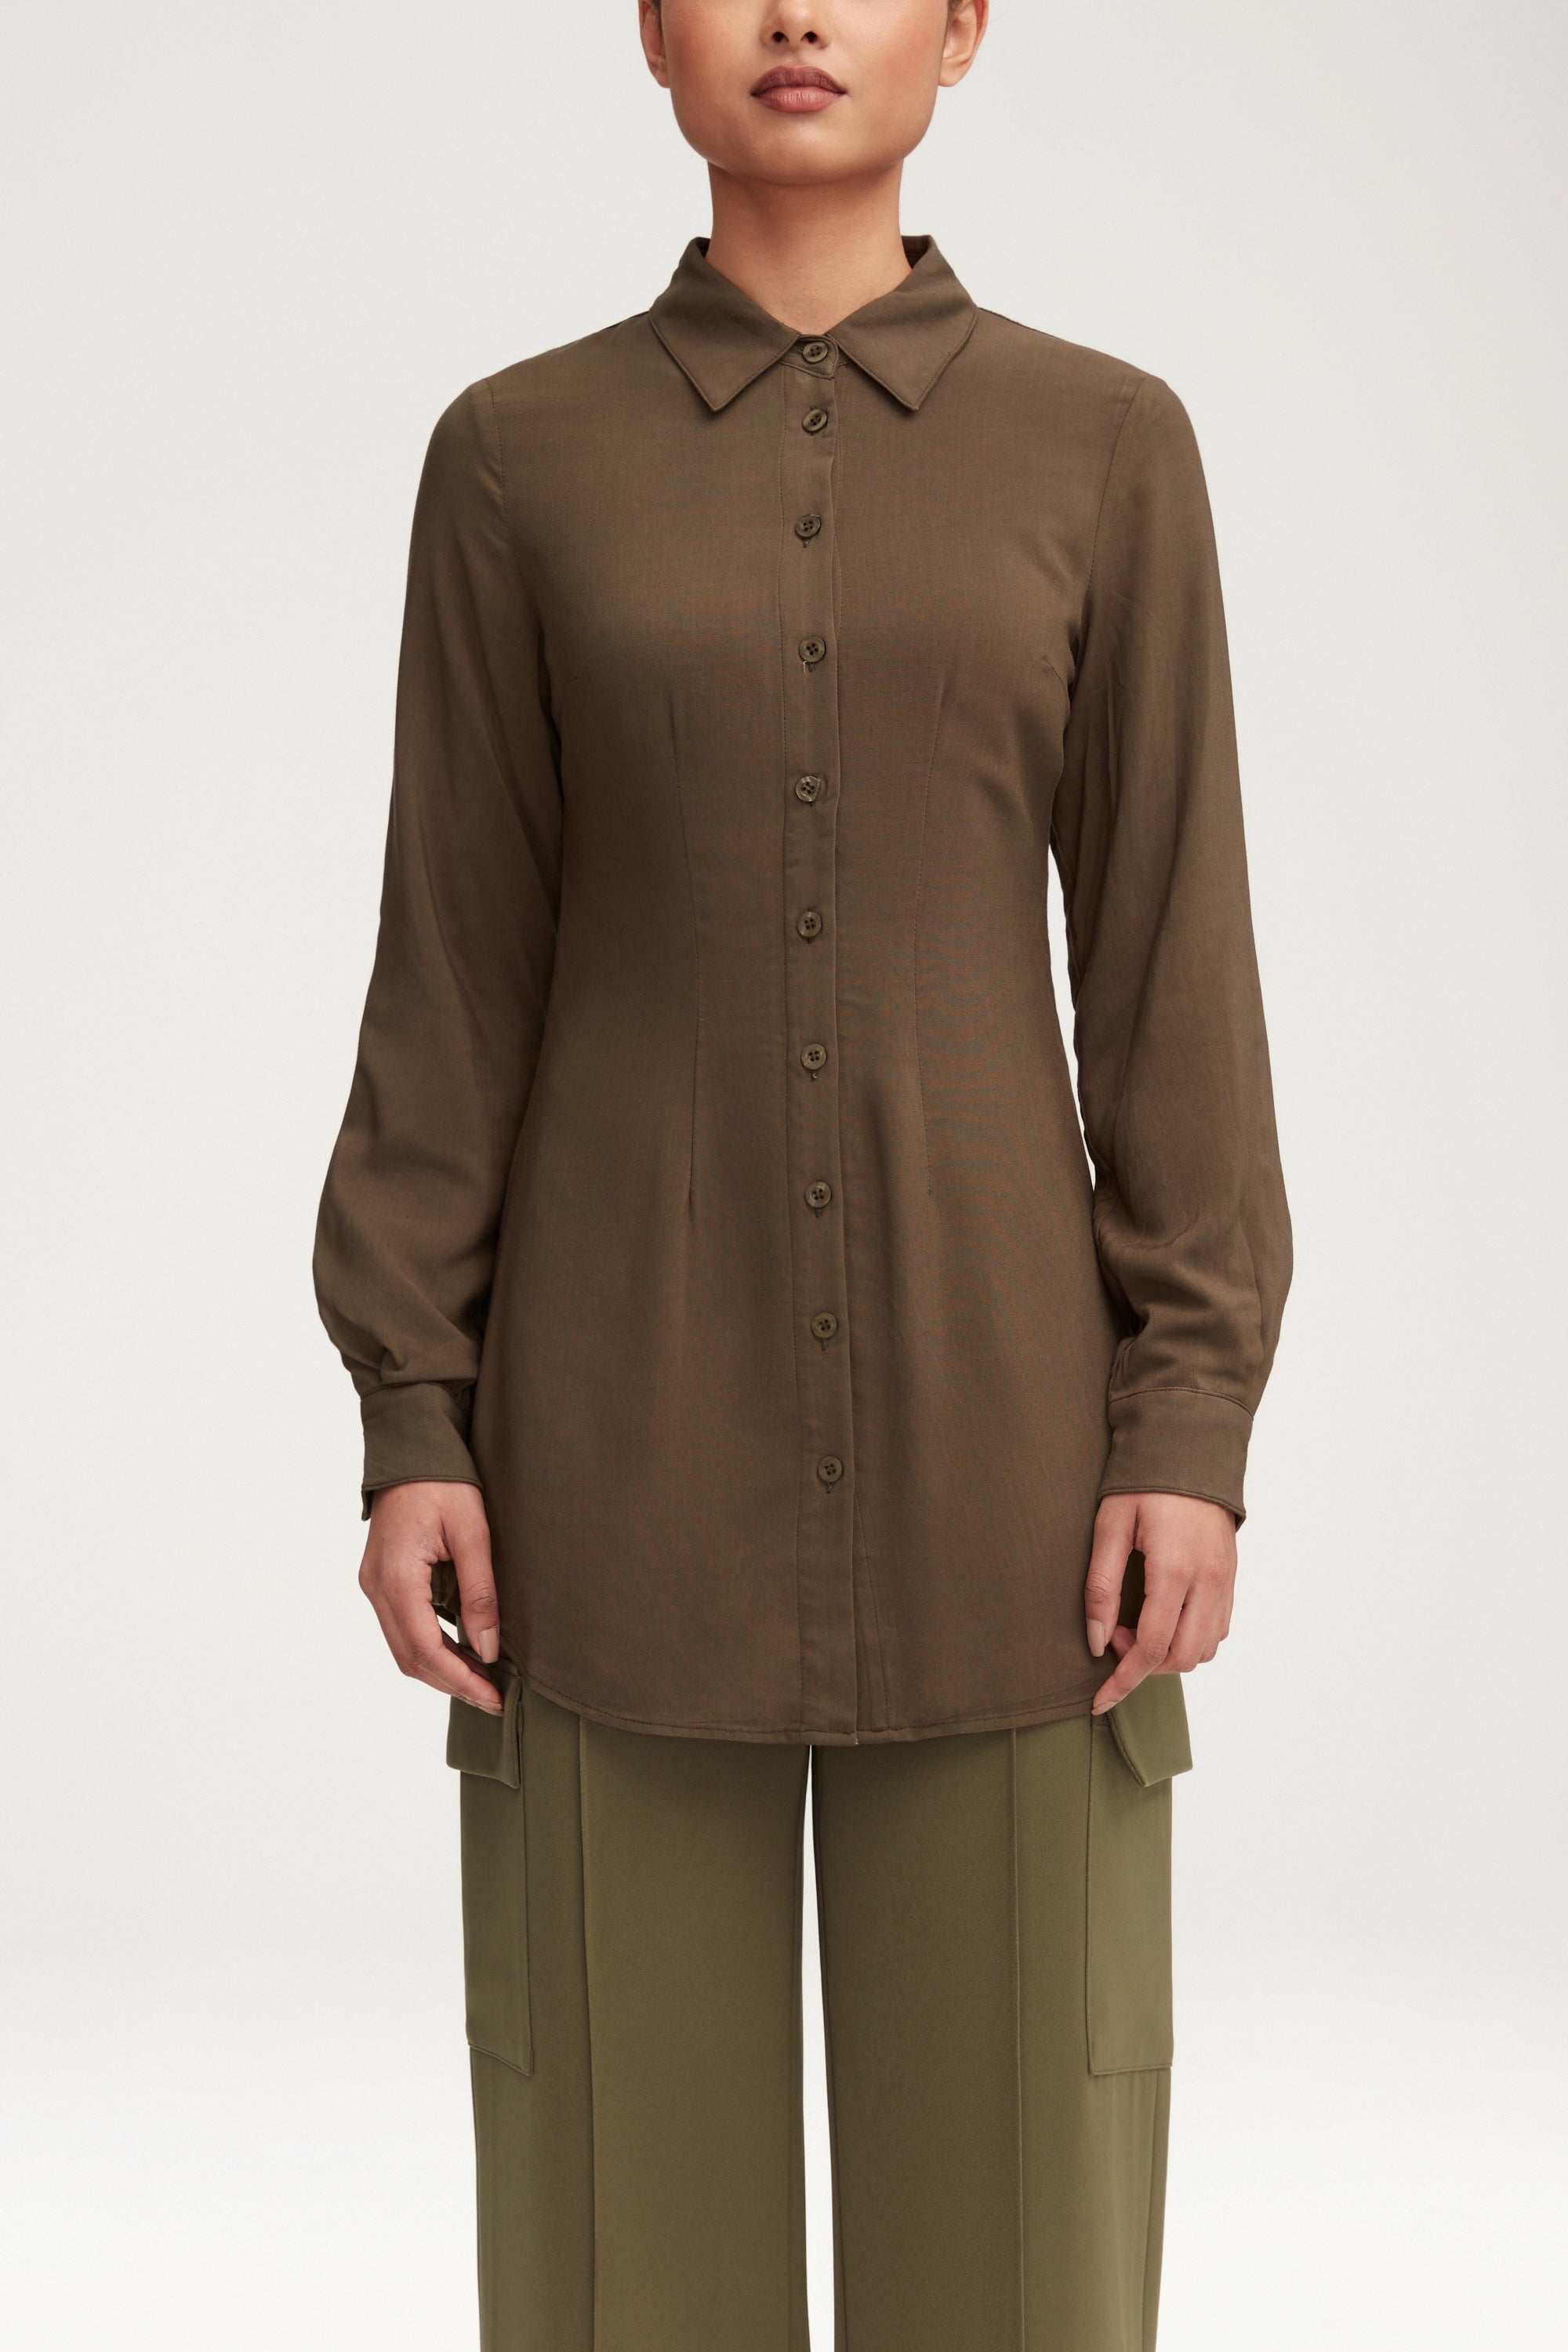 Sarah Fitted Button Down Top - Dark Olive Clothing Veiled 